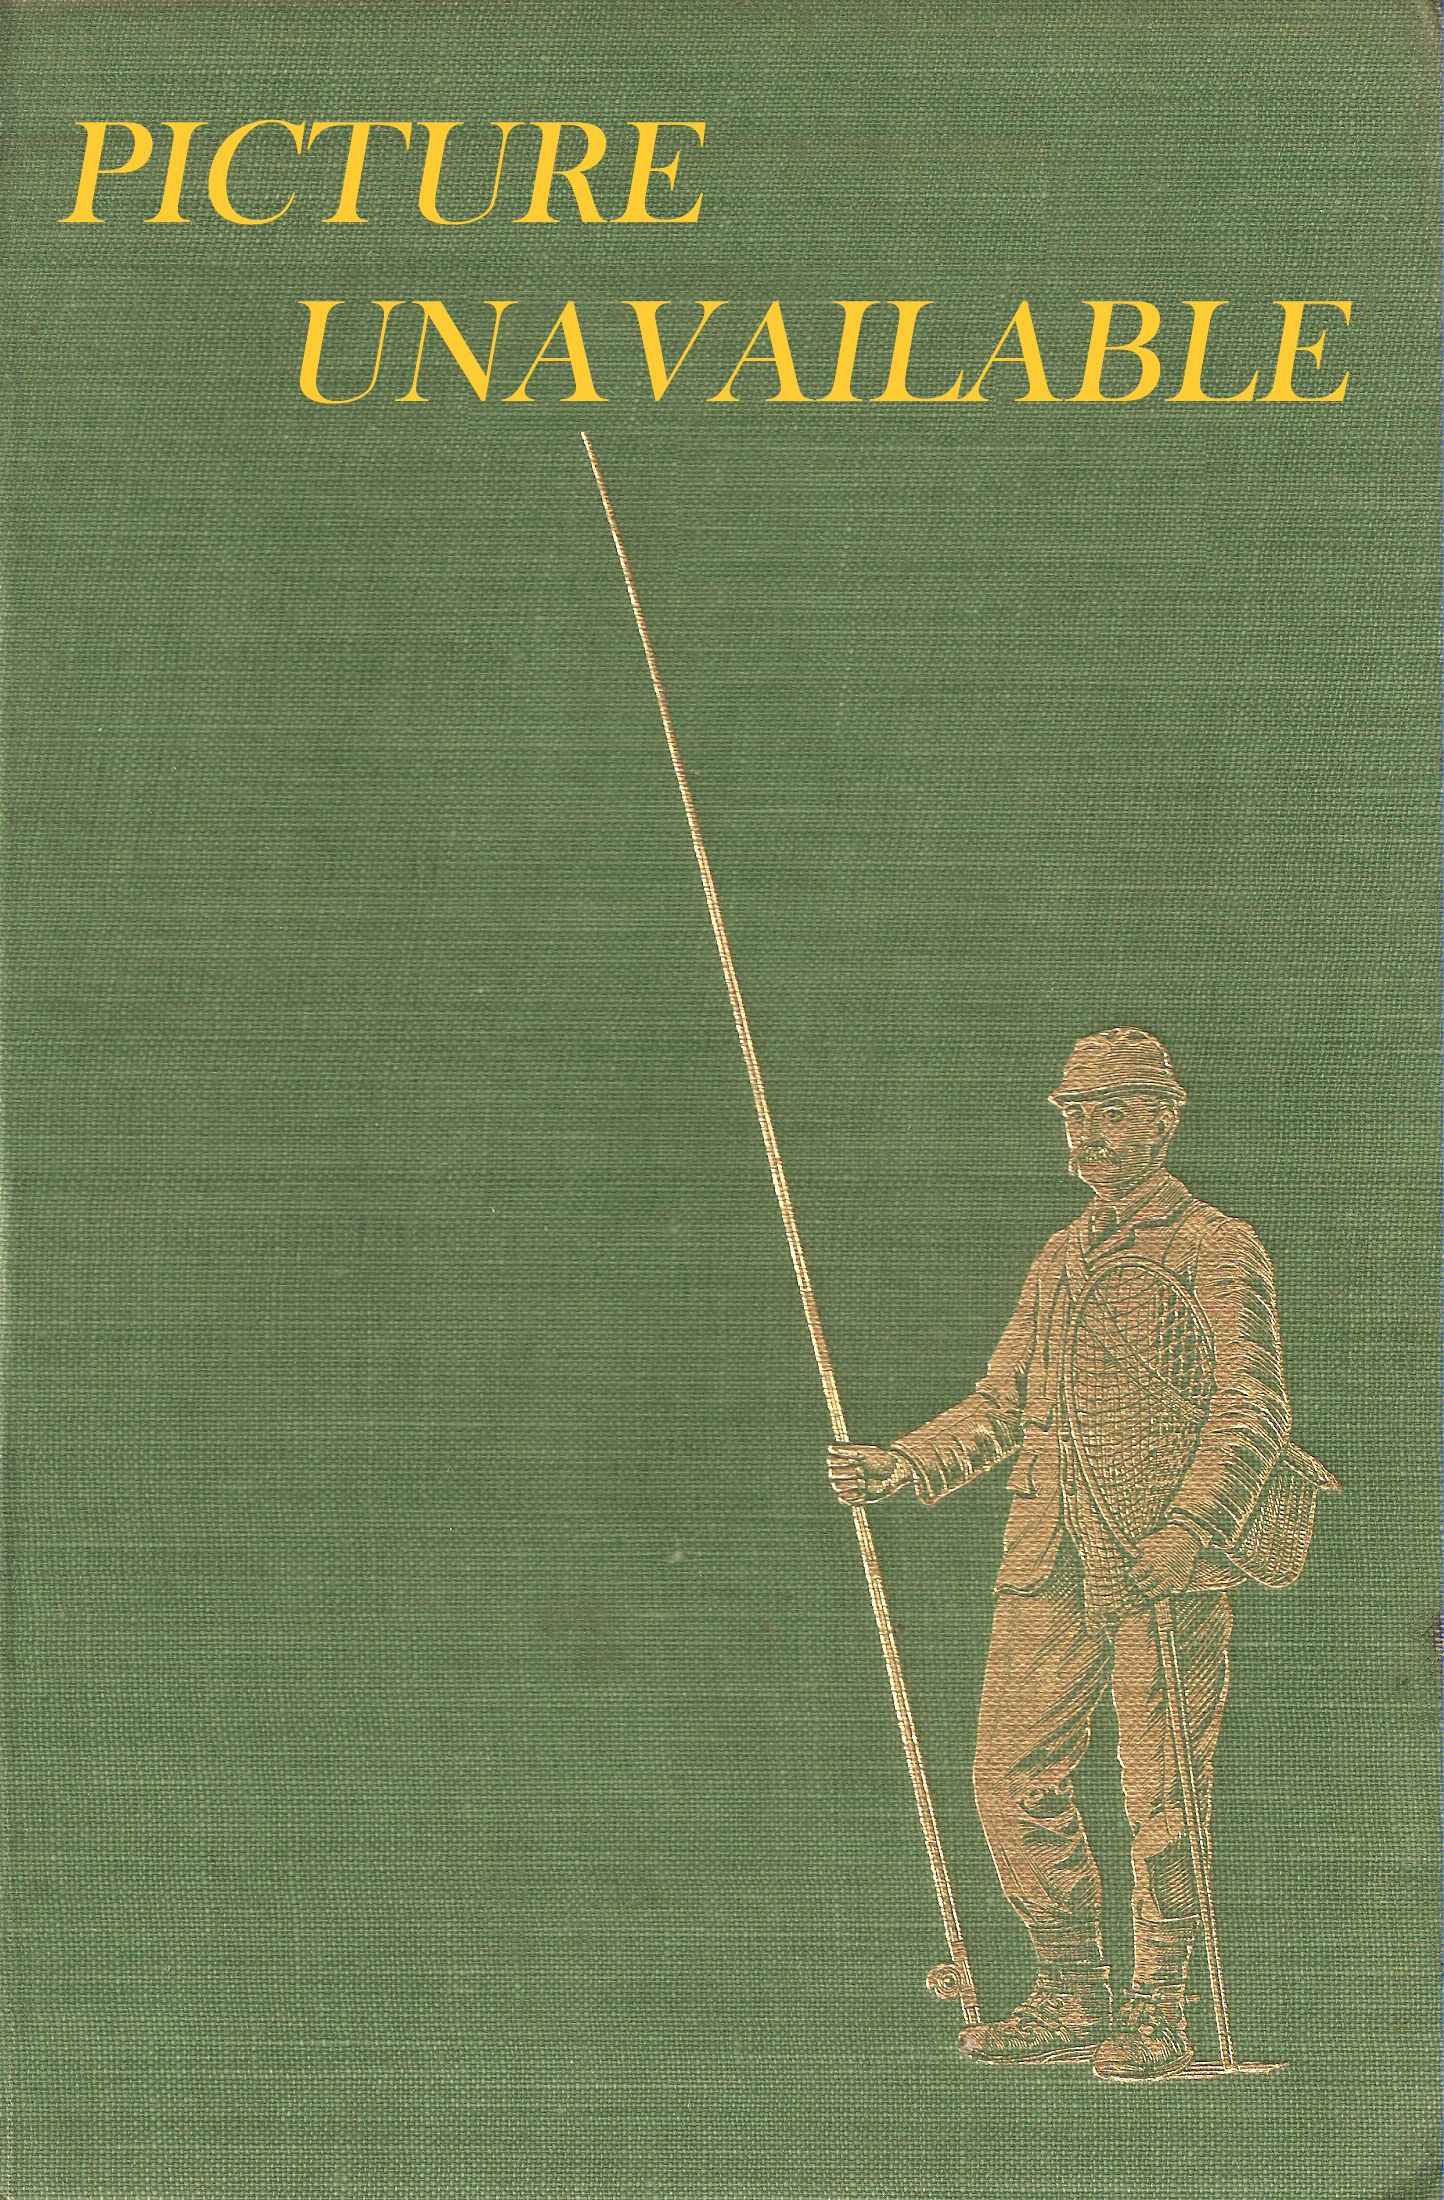 A FLY FISHER'S LIFE. By Charles Ritz. With an Introduction by Bernard Venables. Translated [from the German] by Humphrey Hare. First English Language Edition.